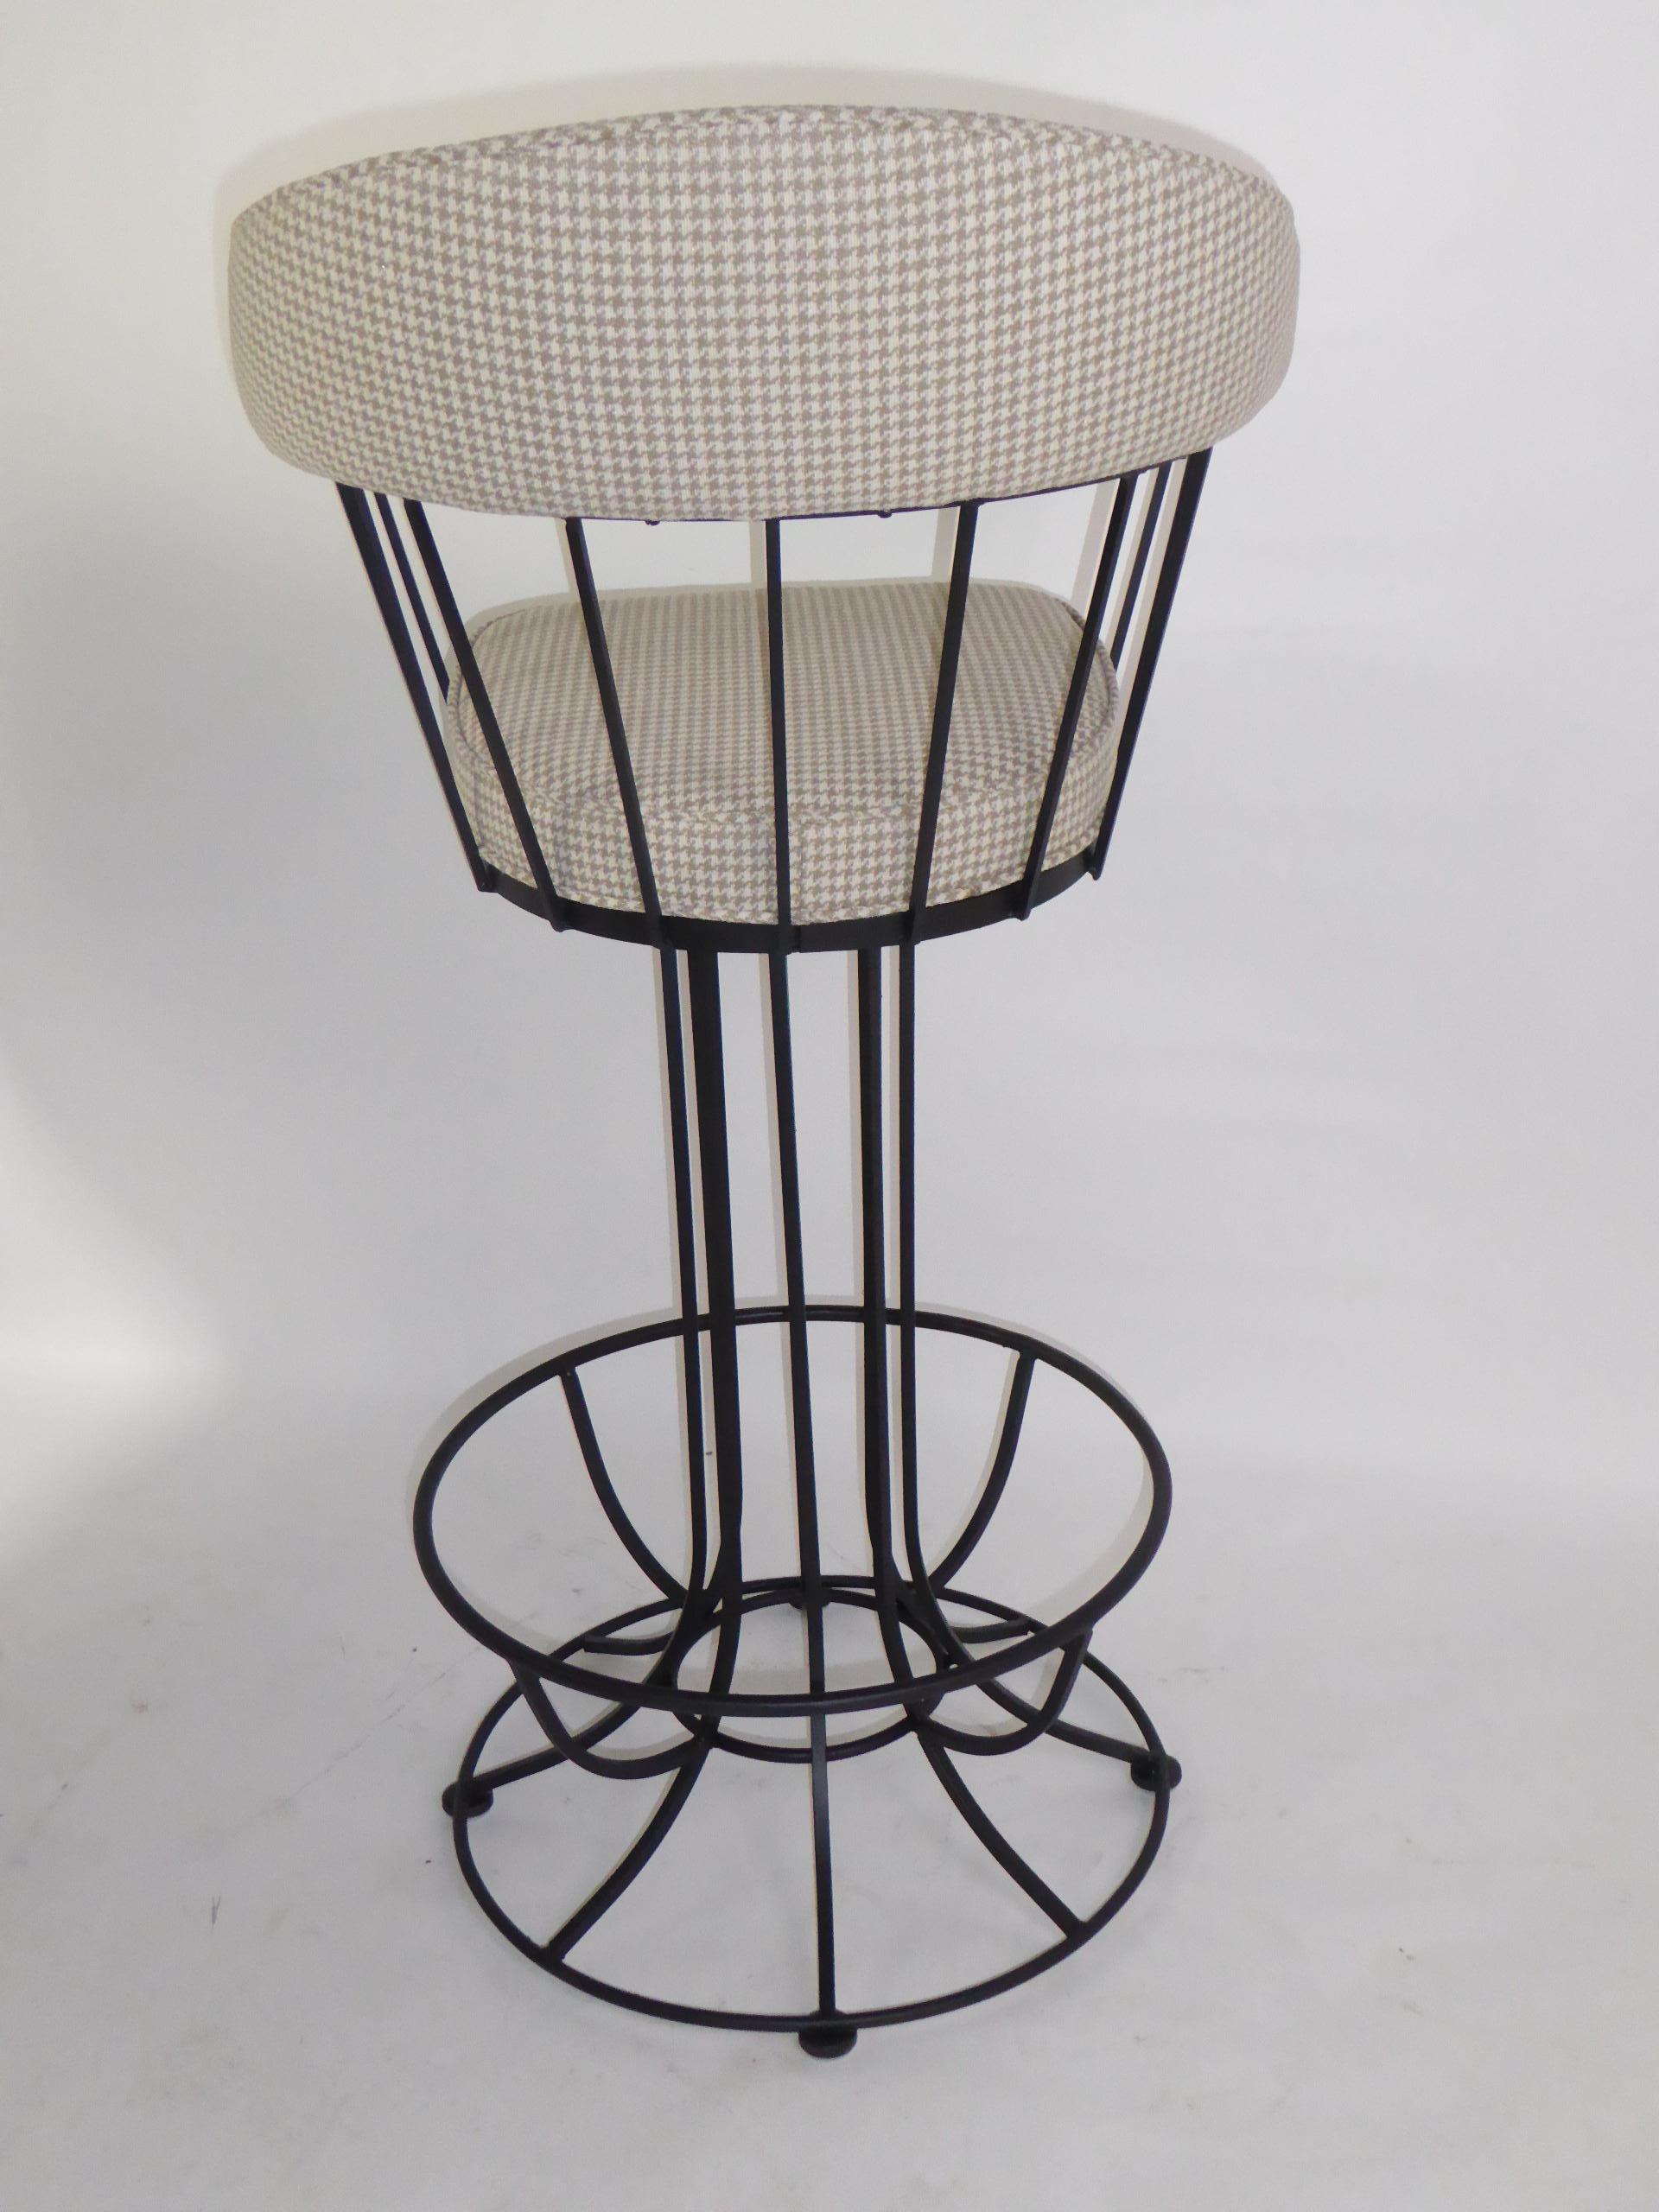 Mid-20th Century Four 1960s Swiveling Bar Stools Upholstered in Houndstooth Anton Lorenz Inspired